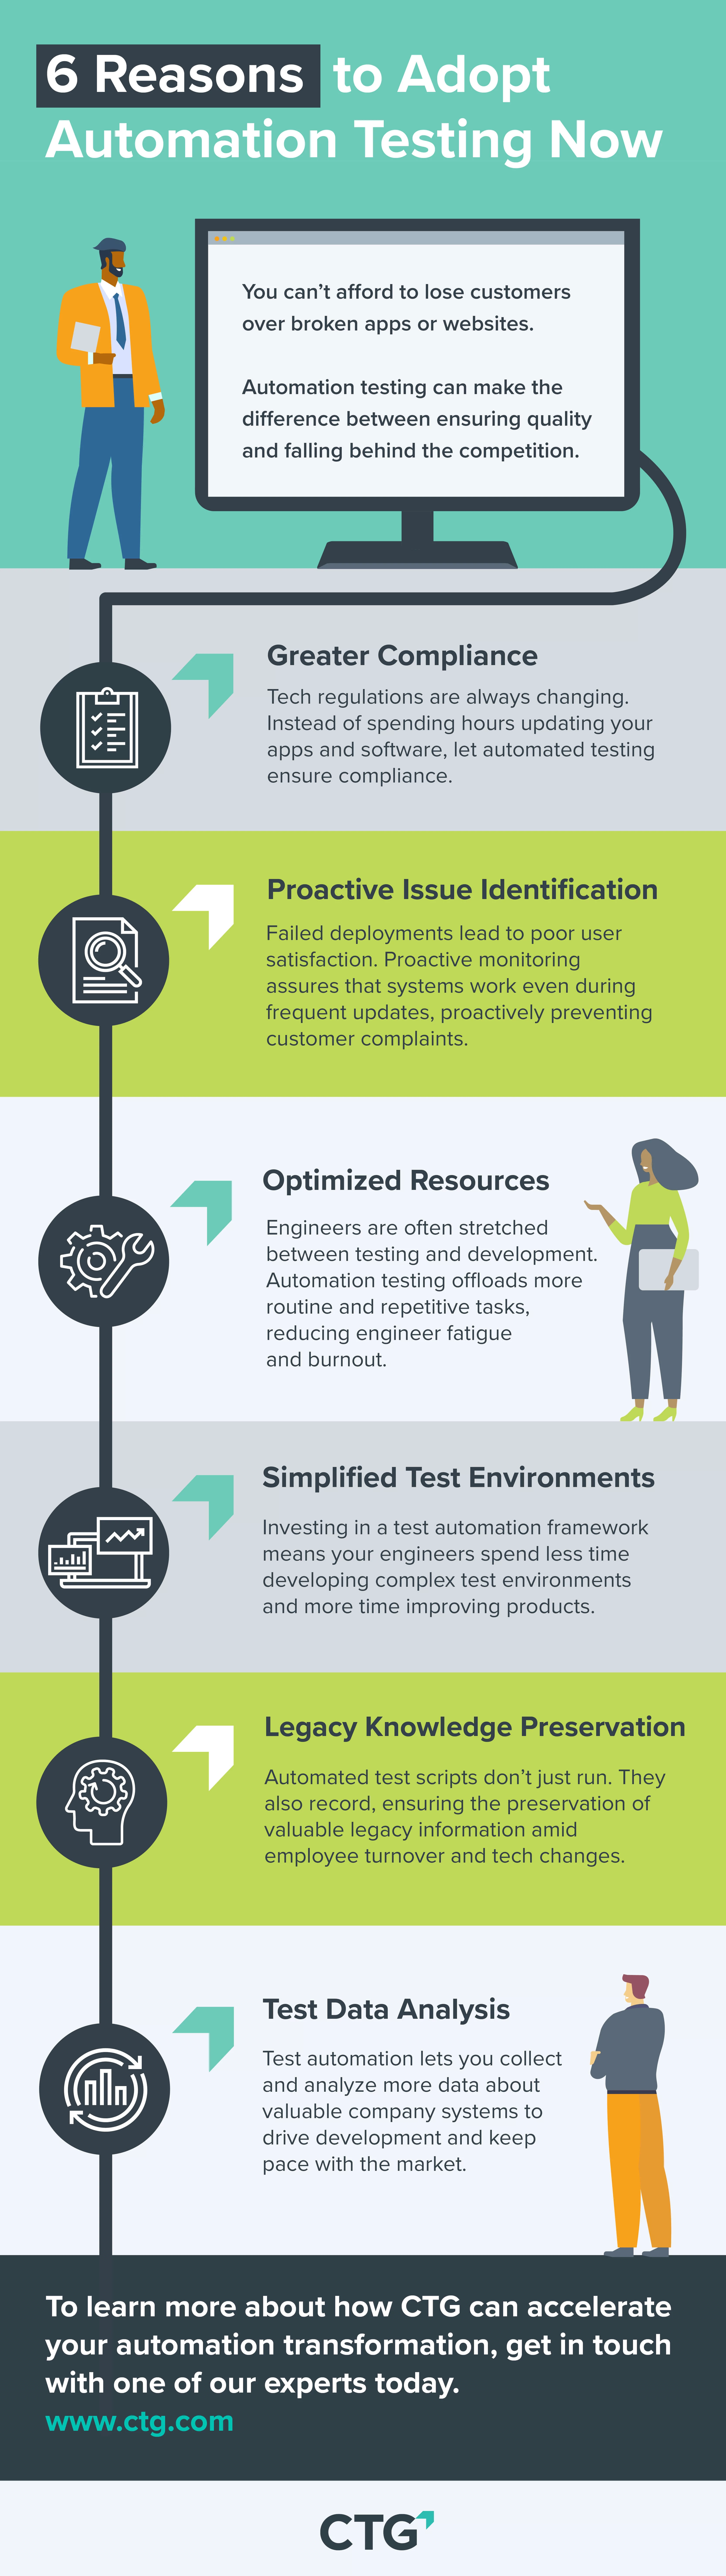 Infographic: 6 Reasons to Adopt Automation Testing Now